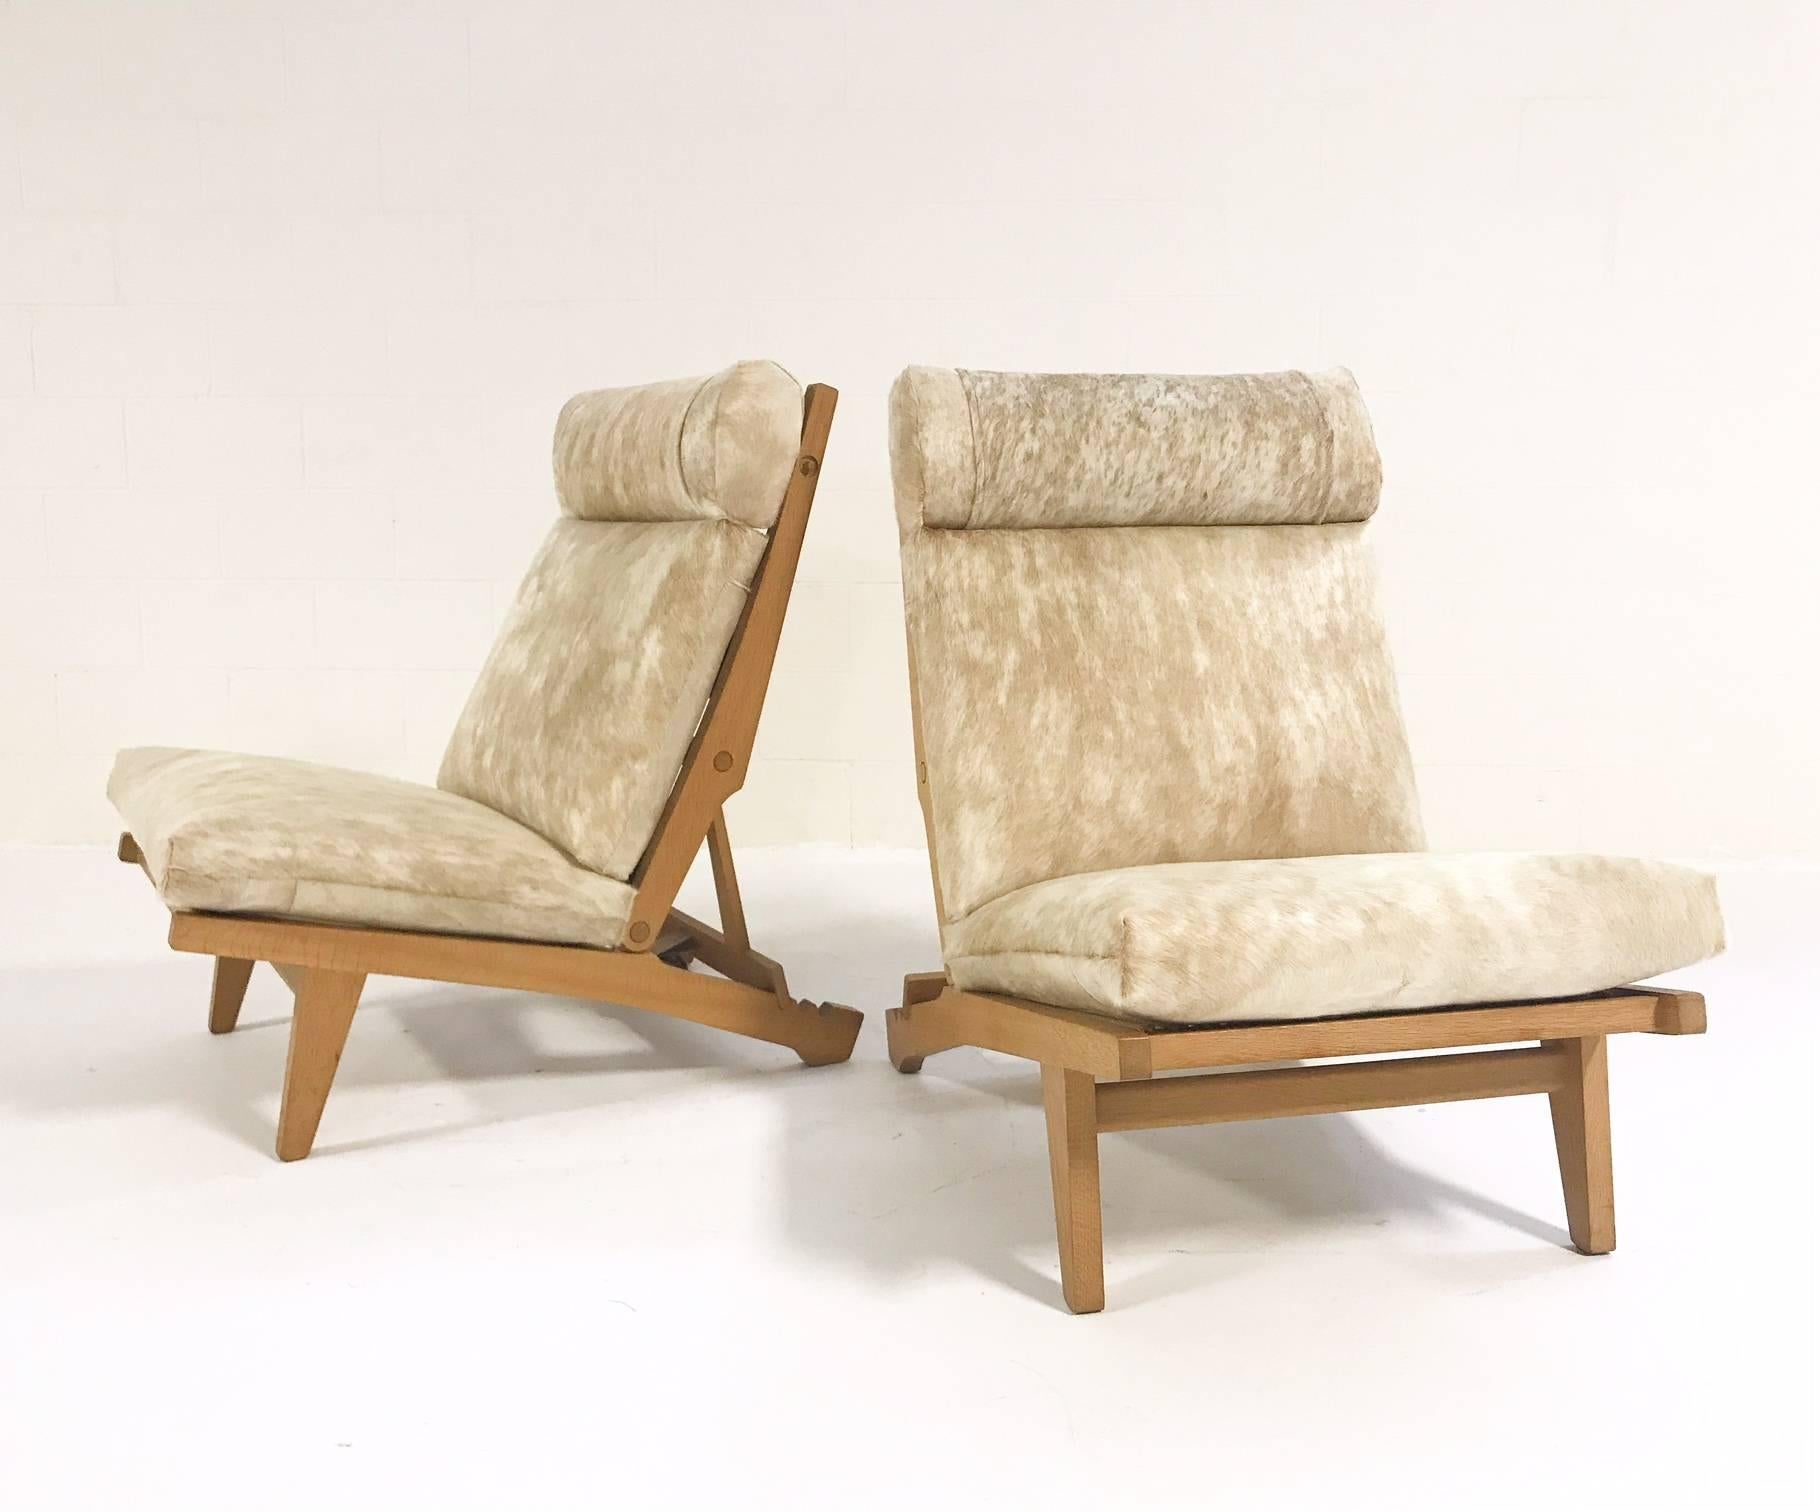 This coveted pair of solid oak lounge chairs was designed by the incomparable Hans Wegner for AP Stolen, with whom he worked for many years. We chose gorgeous palomino and white Brazilian cowhides to complement the lightness and beauty of the oak.